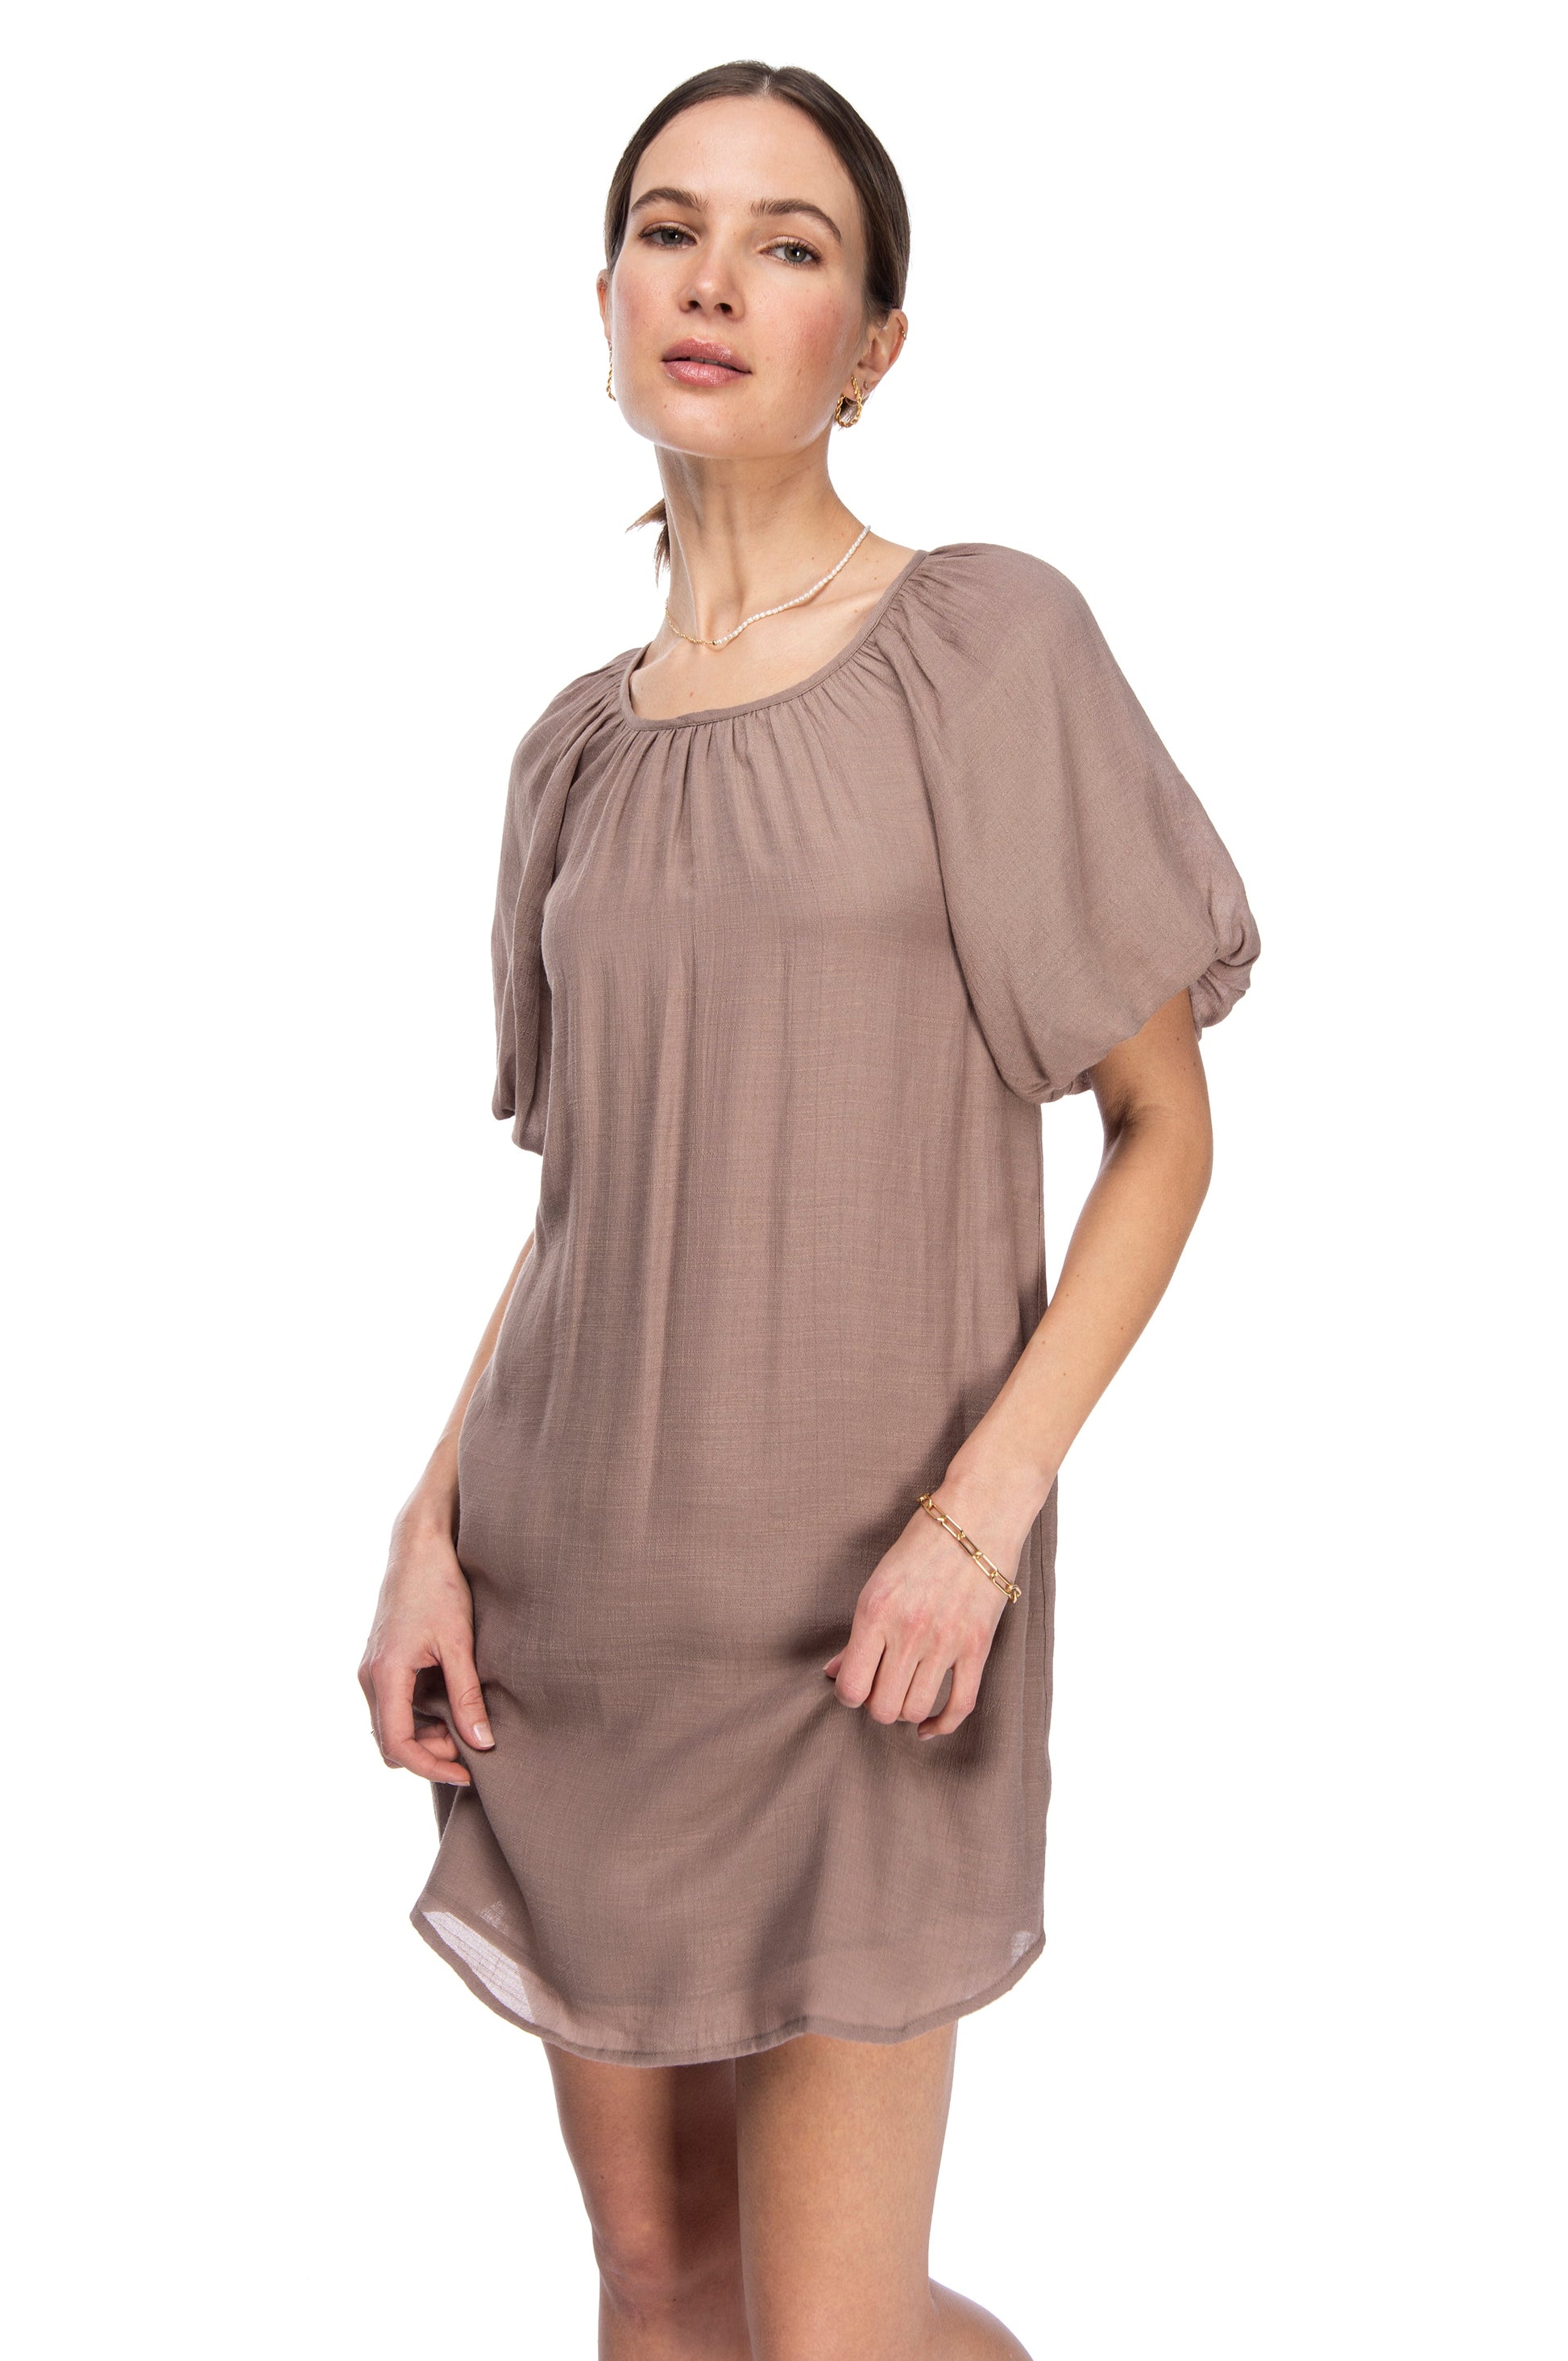 A woman standing against a white background, wearing a chic, short-sleeved, taupe gauze dress from B Collection by Bobeau with simple jewelry, looking directly at the camera with a neutral expression.